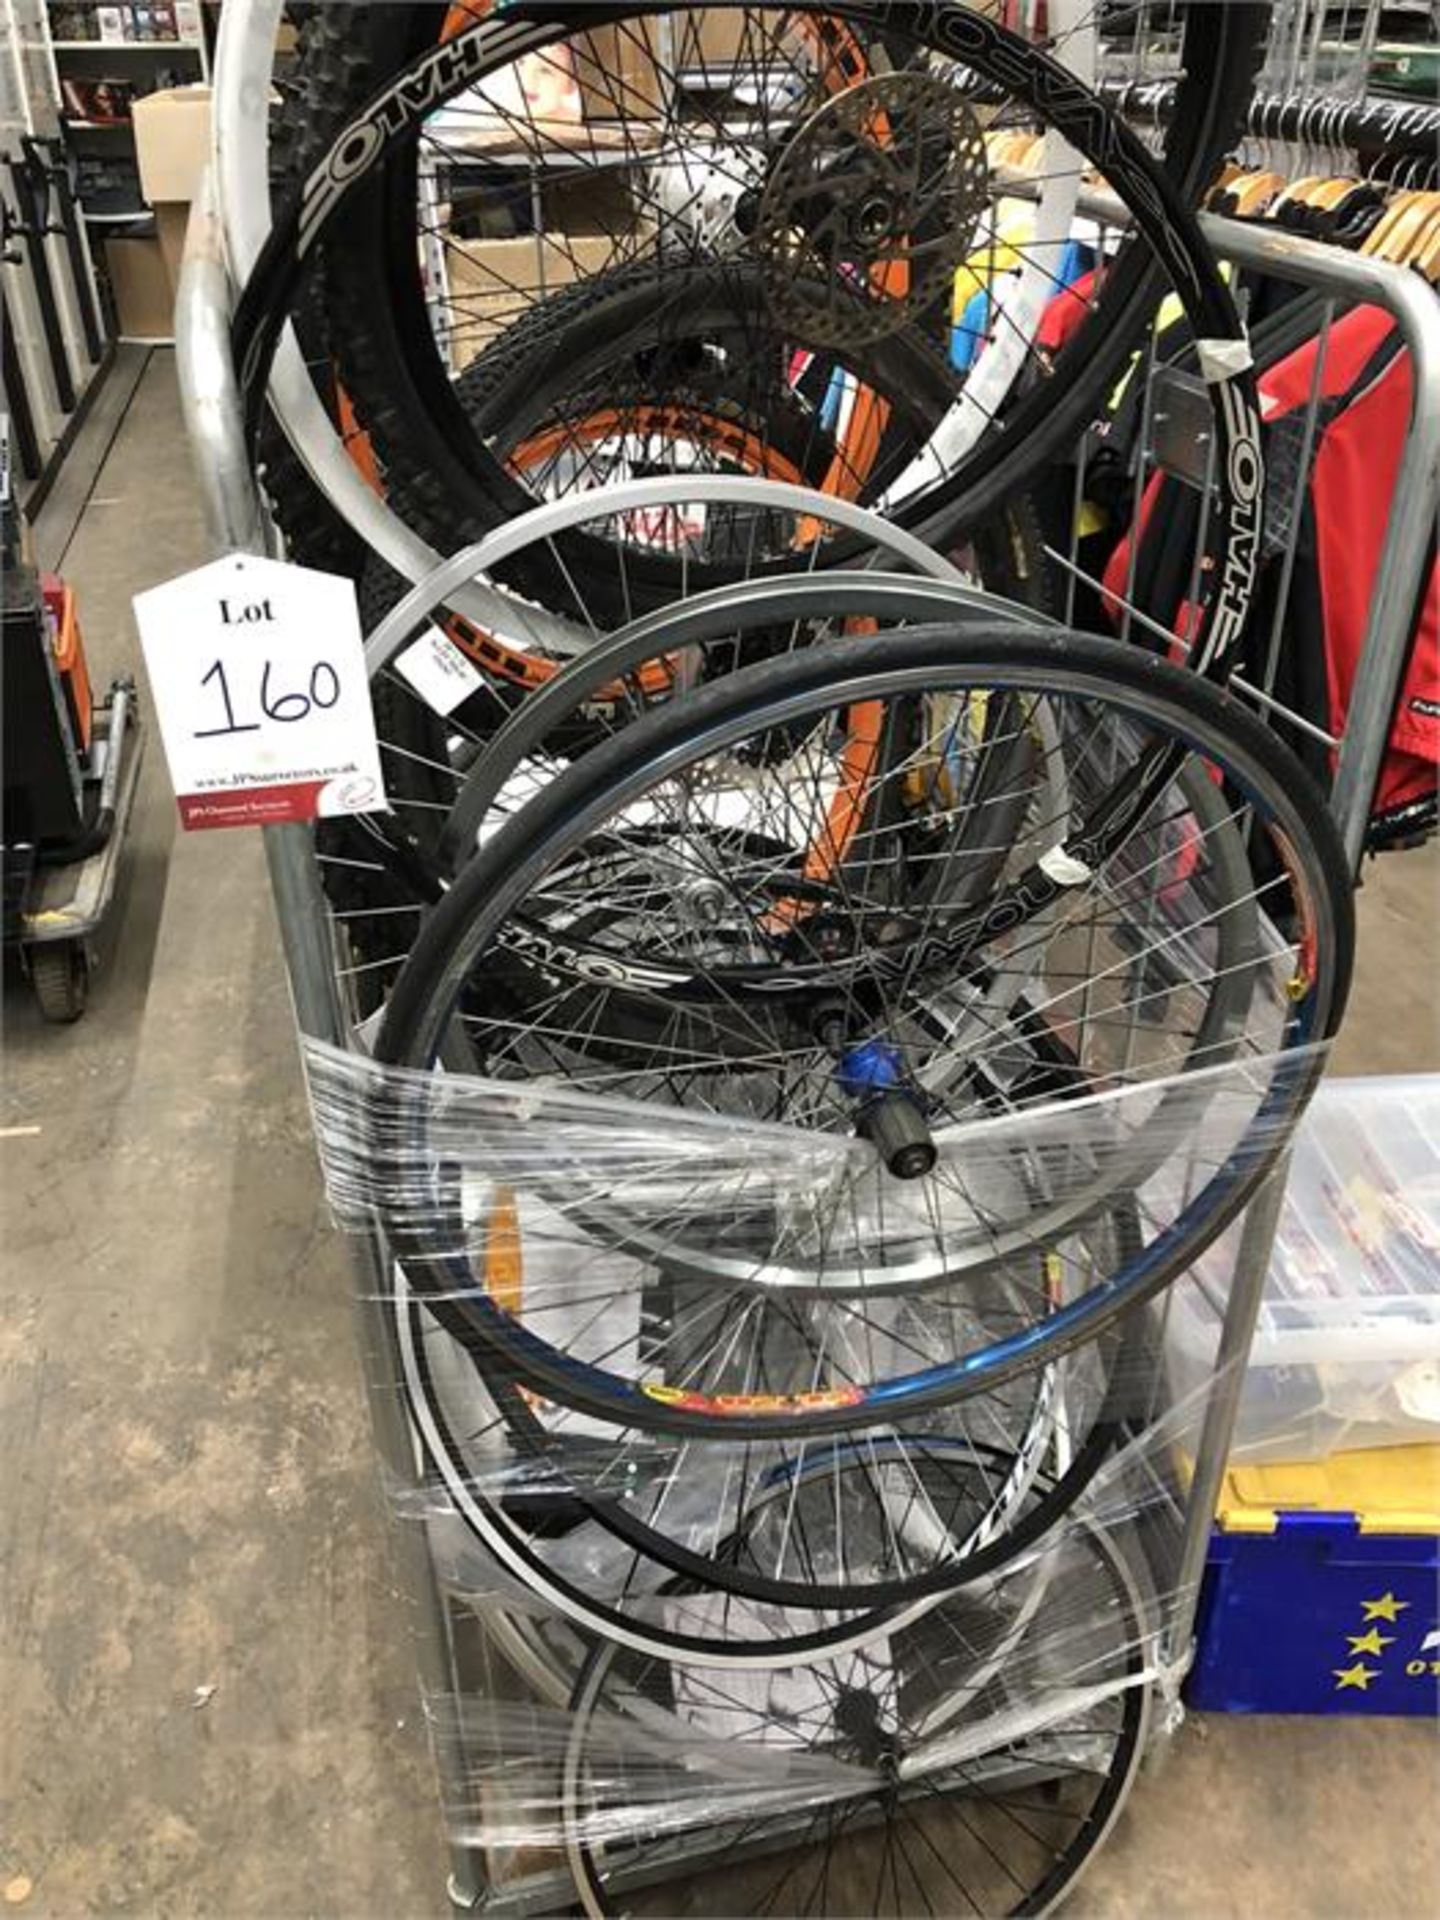 Cage of Cycling Tires, Alloys and Accessories